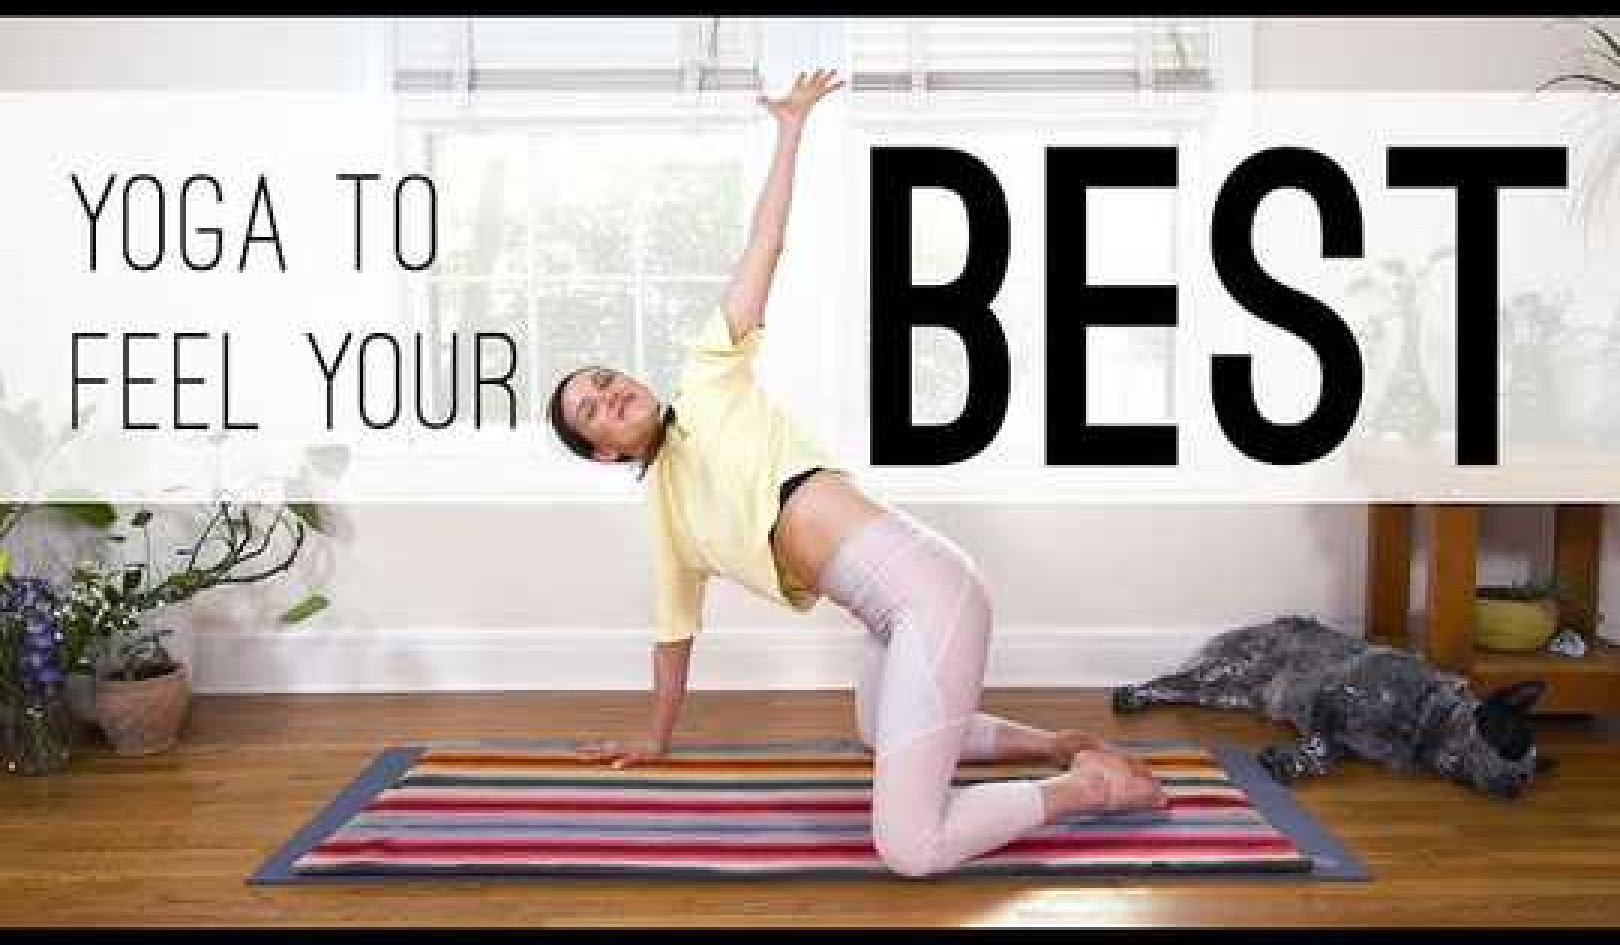 Yoga To Feel Your Best